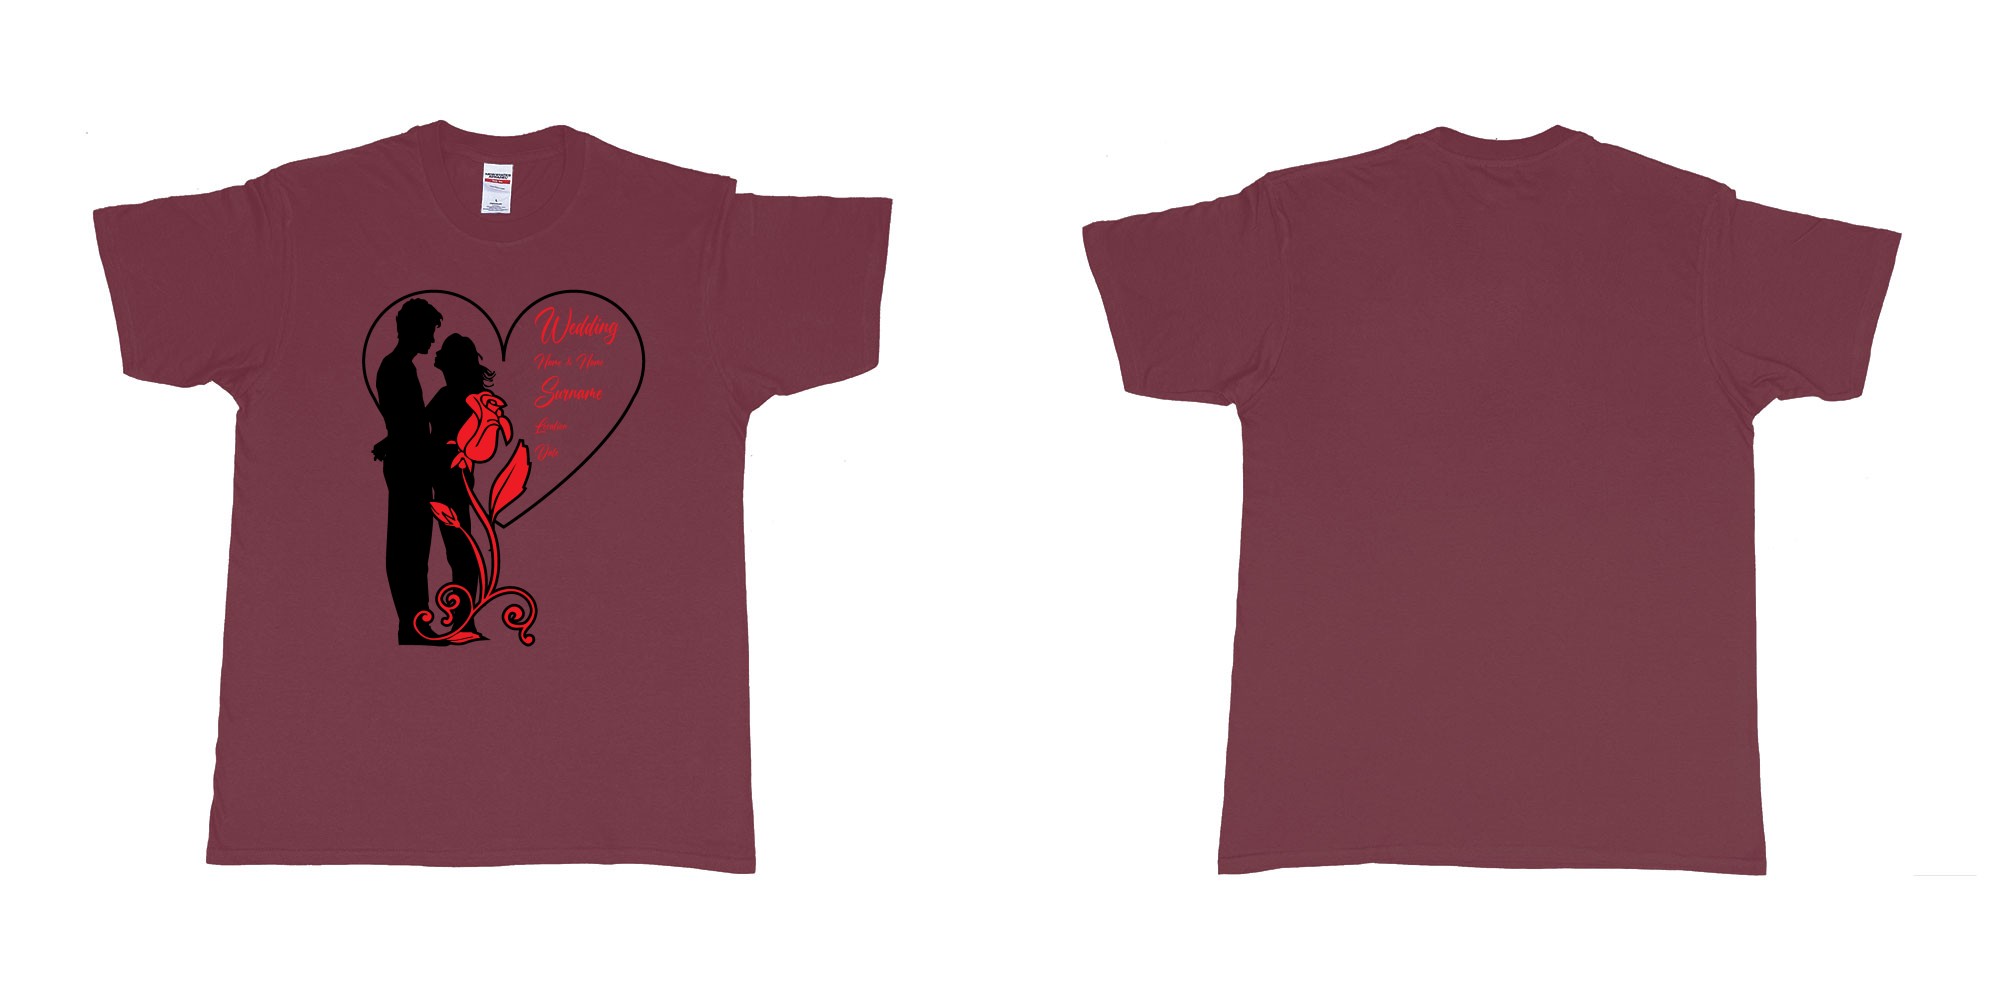 Custom tshirt design wedding couple rose heart in fabric color marron choice your own text made in Bali by The Pirate Way